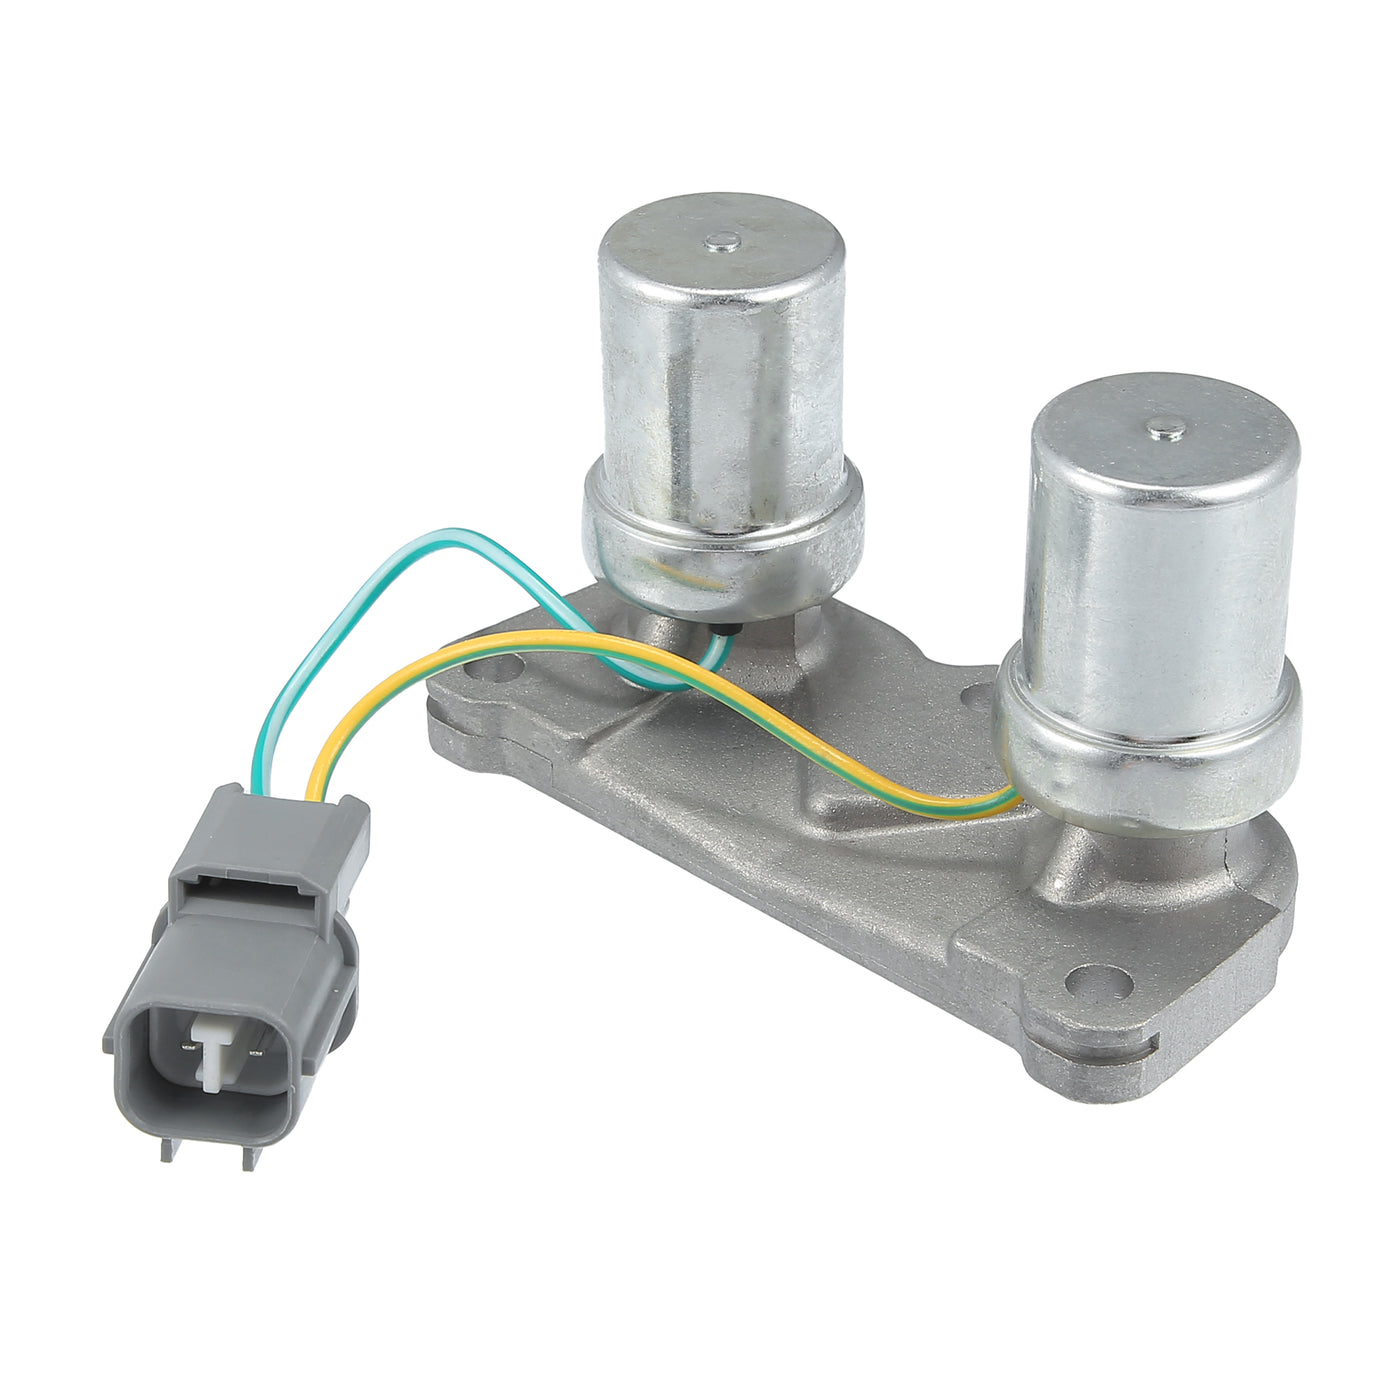 ACROPIX Transmission Shift Solenoid Replacement Fit for Acura Integra - Pack of 1 Silver Tone Gray